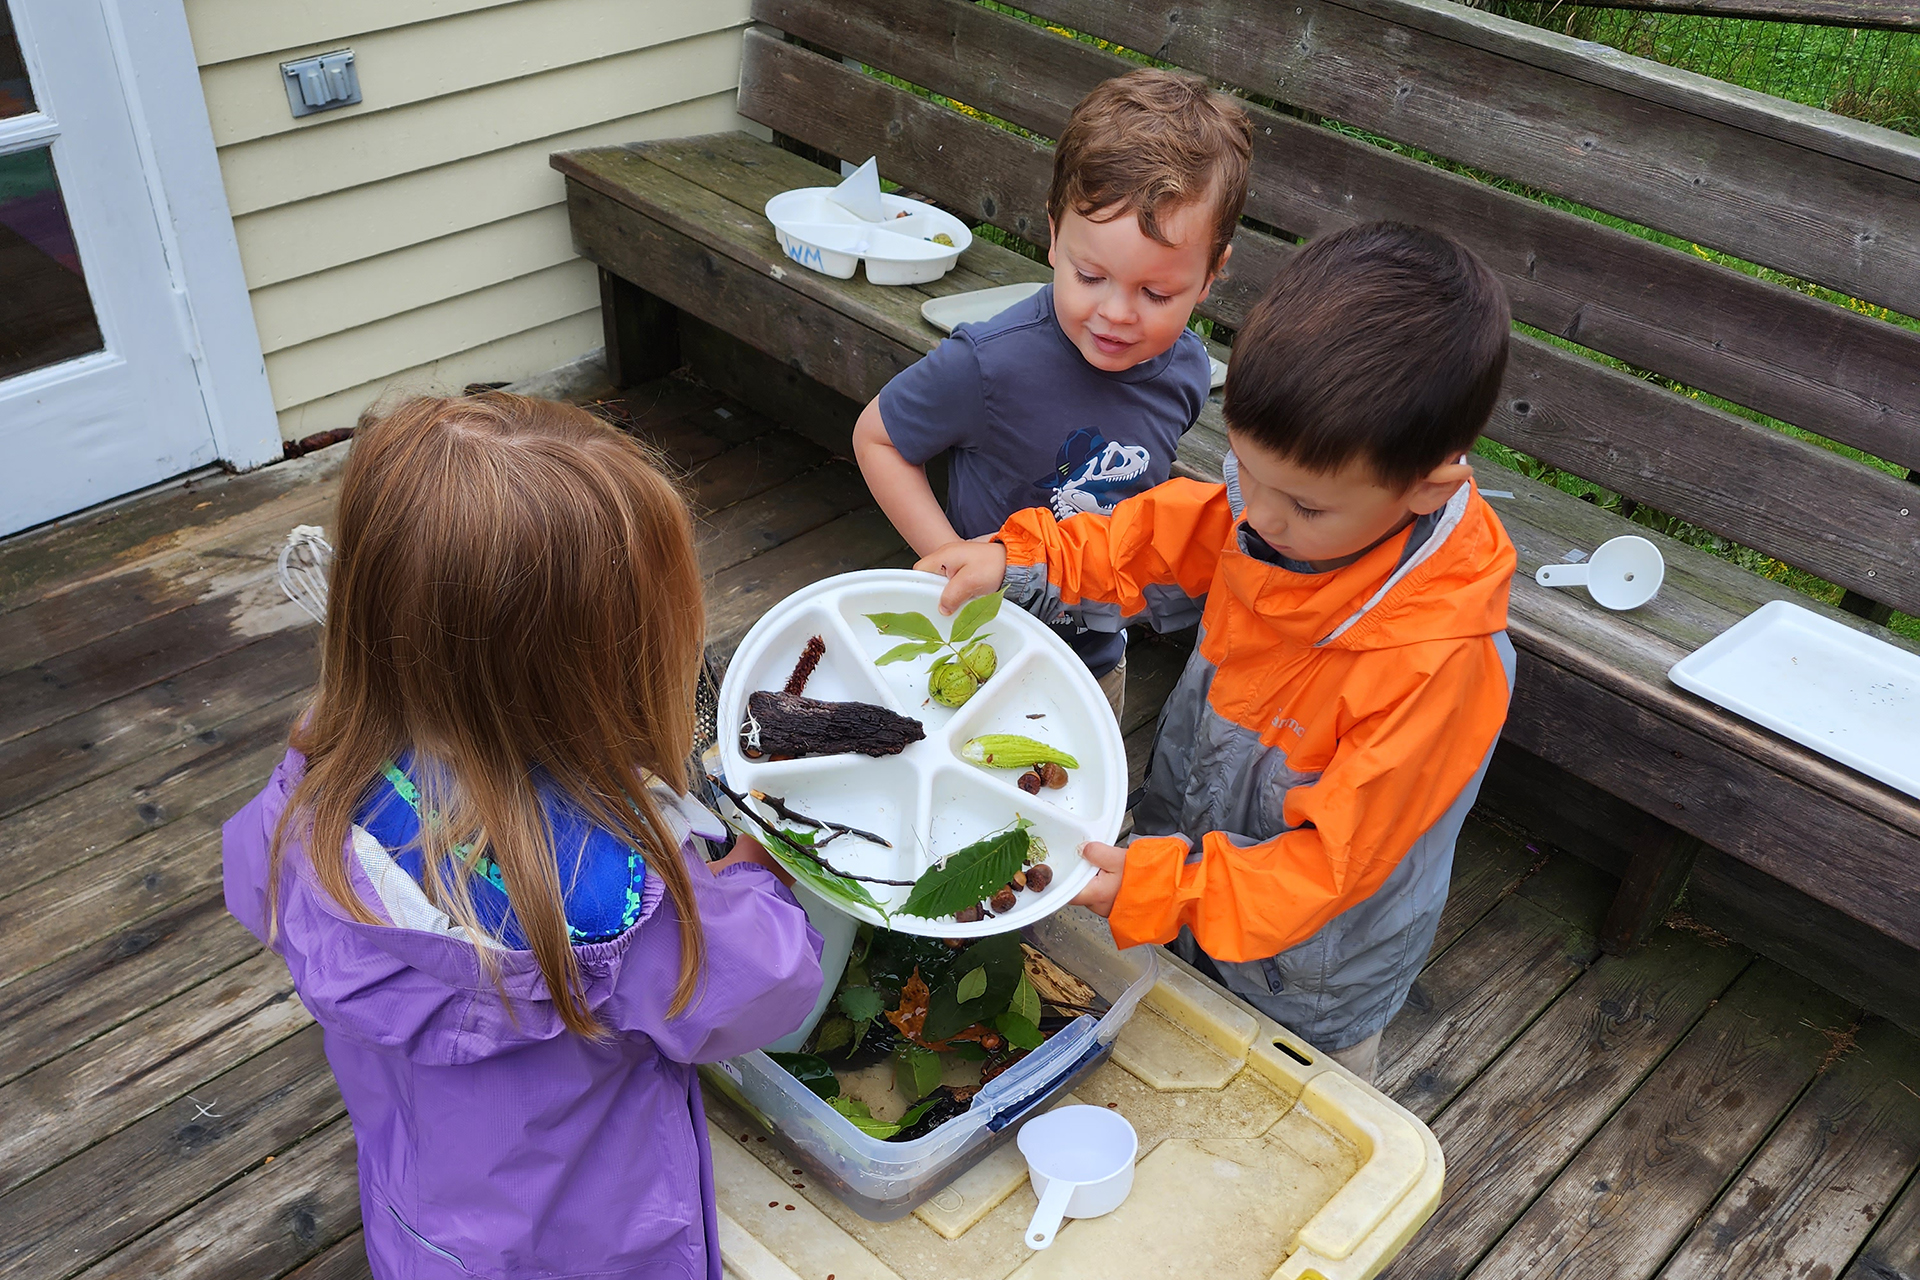 children inspecting plant pieces on a divided plate